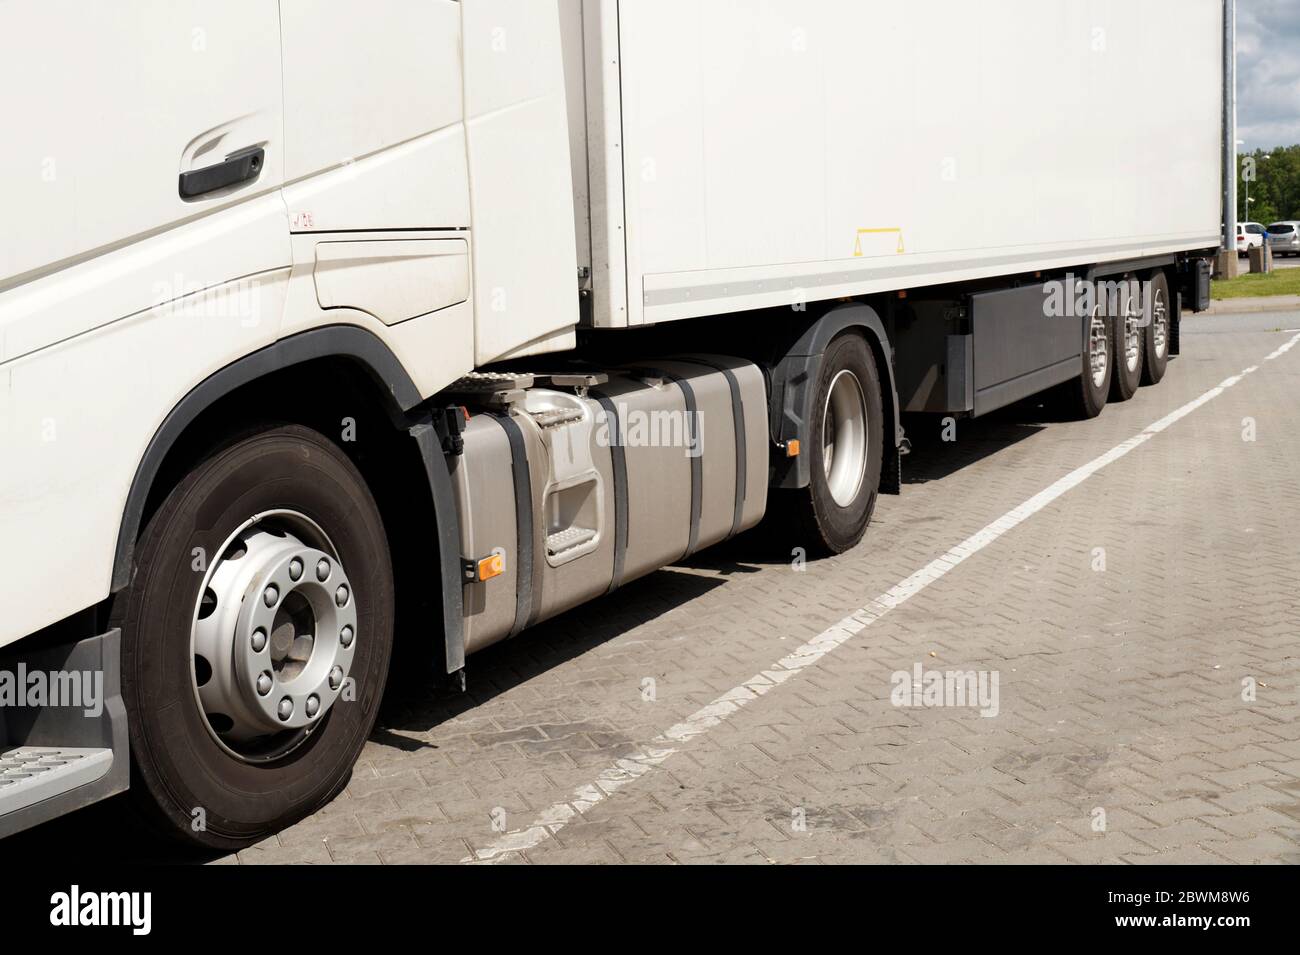 View of the lower part of the 18 wheeled truck. A truck in a parking lot. Stock Photo